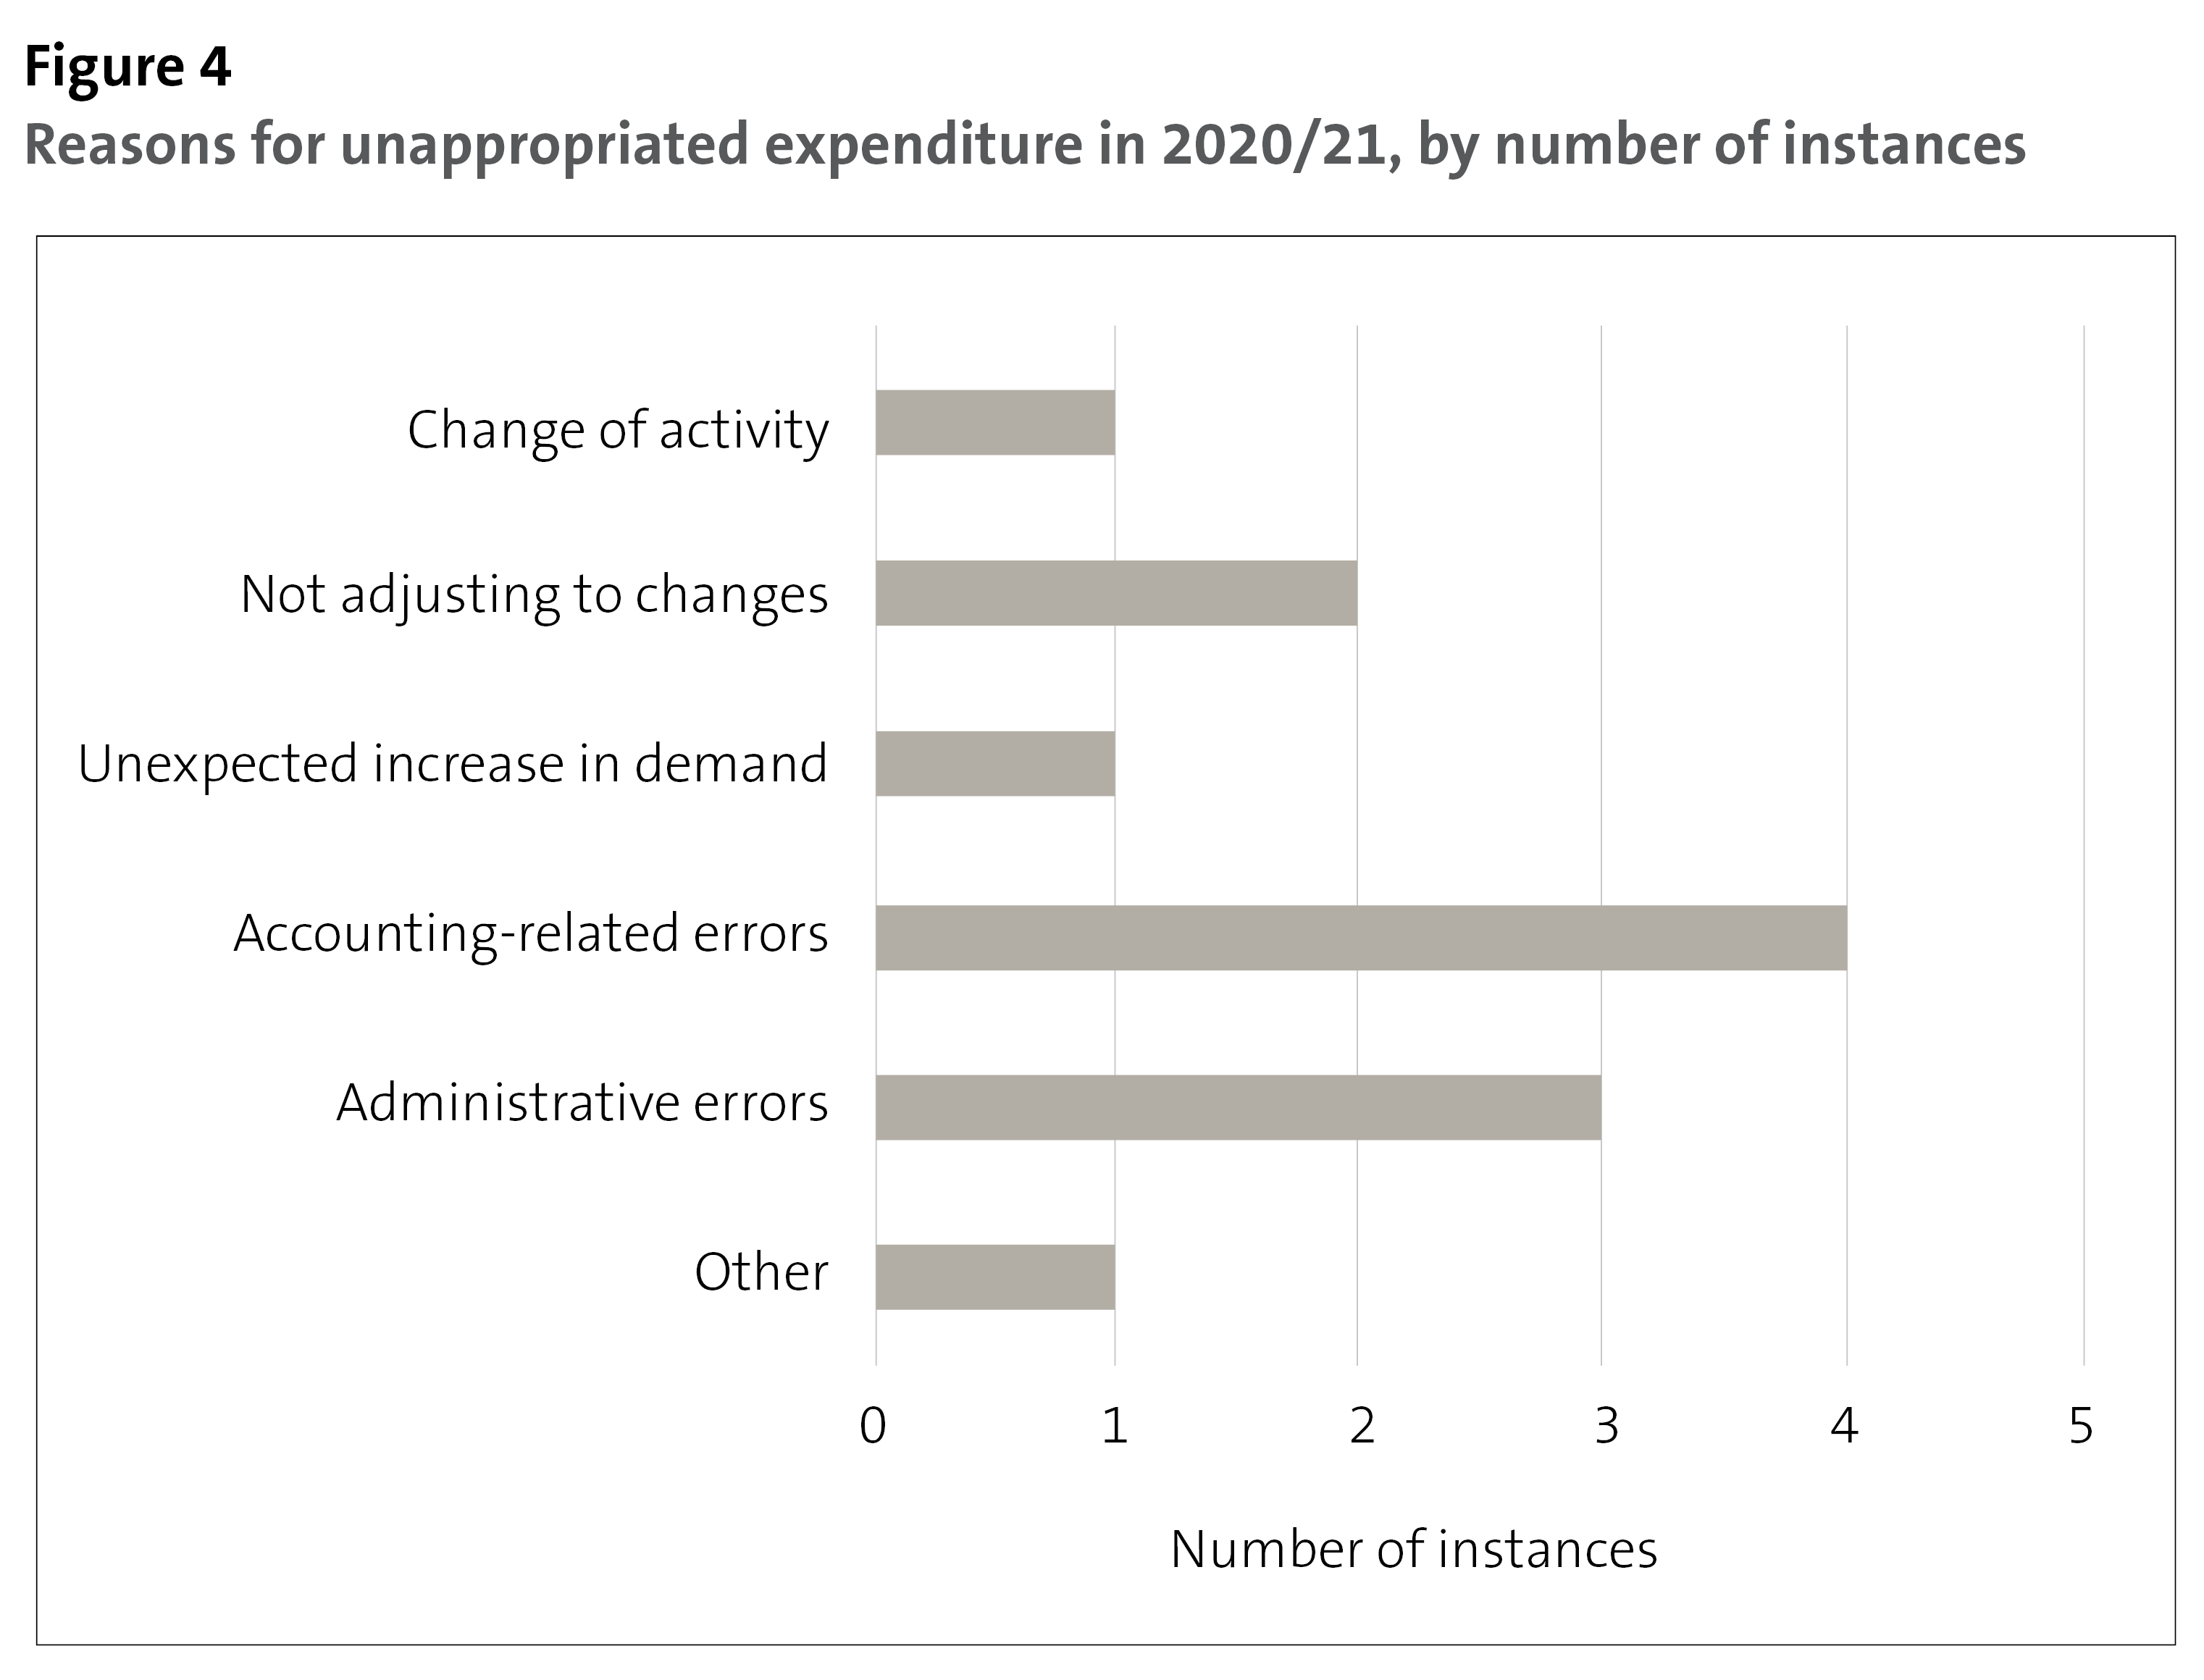 Figure 4 - Reasons for unappropriated expenditure in 2020/21, by number of instances